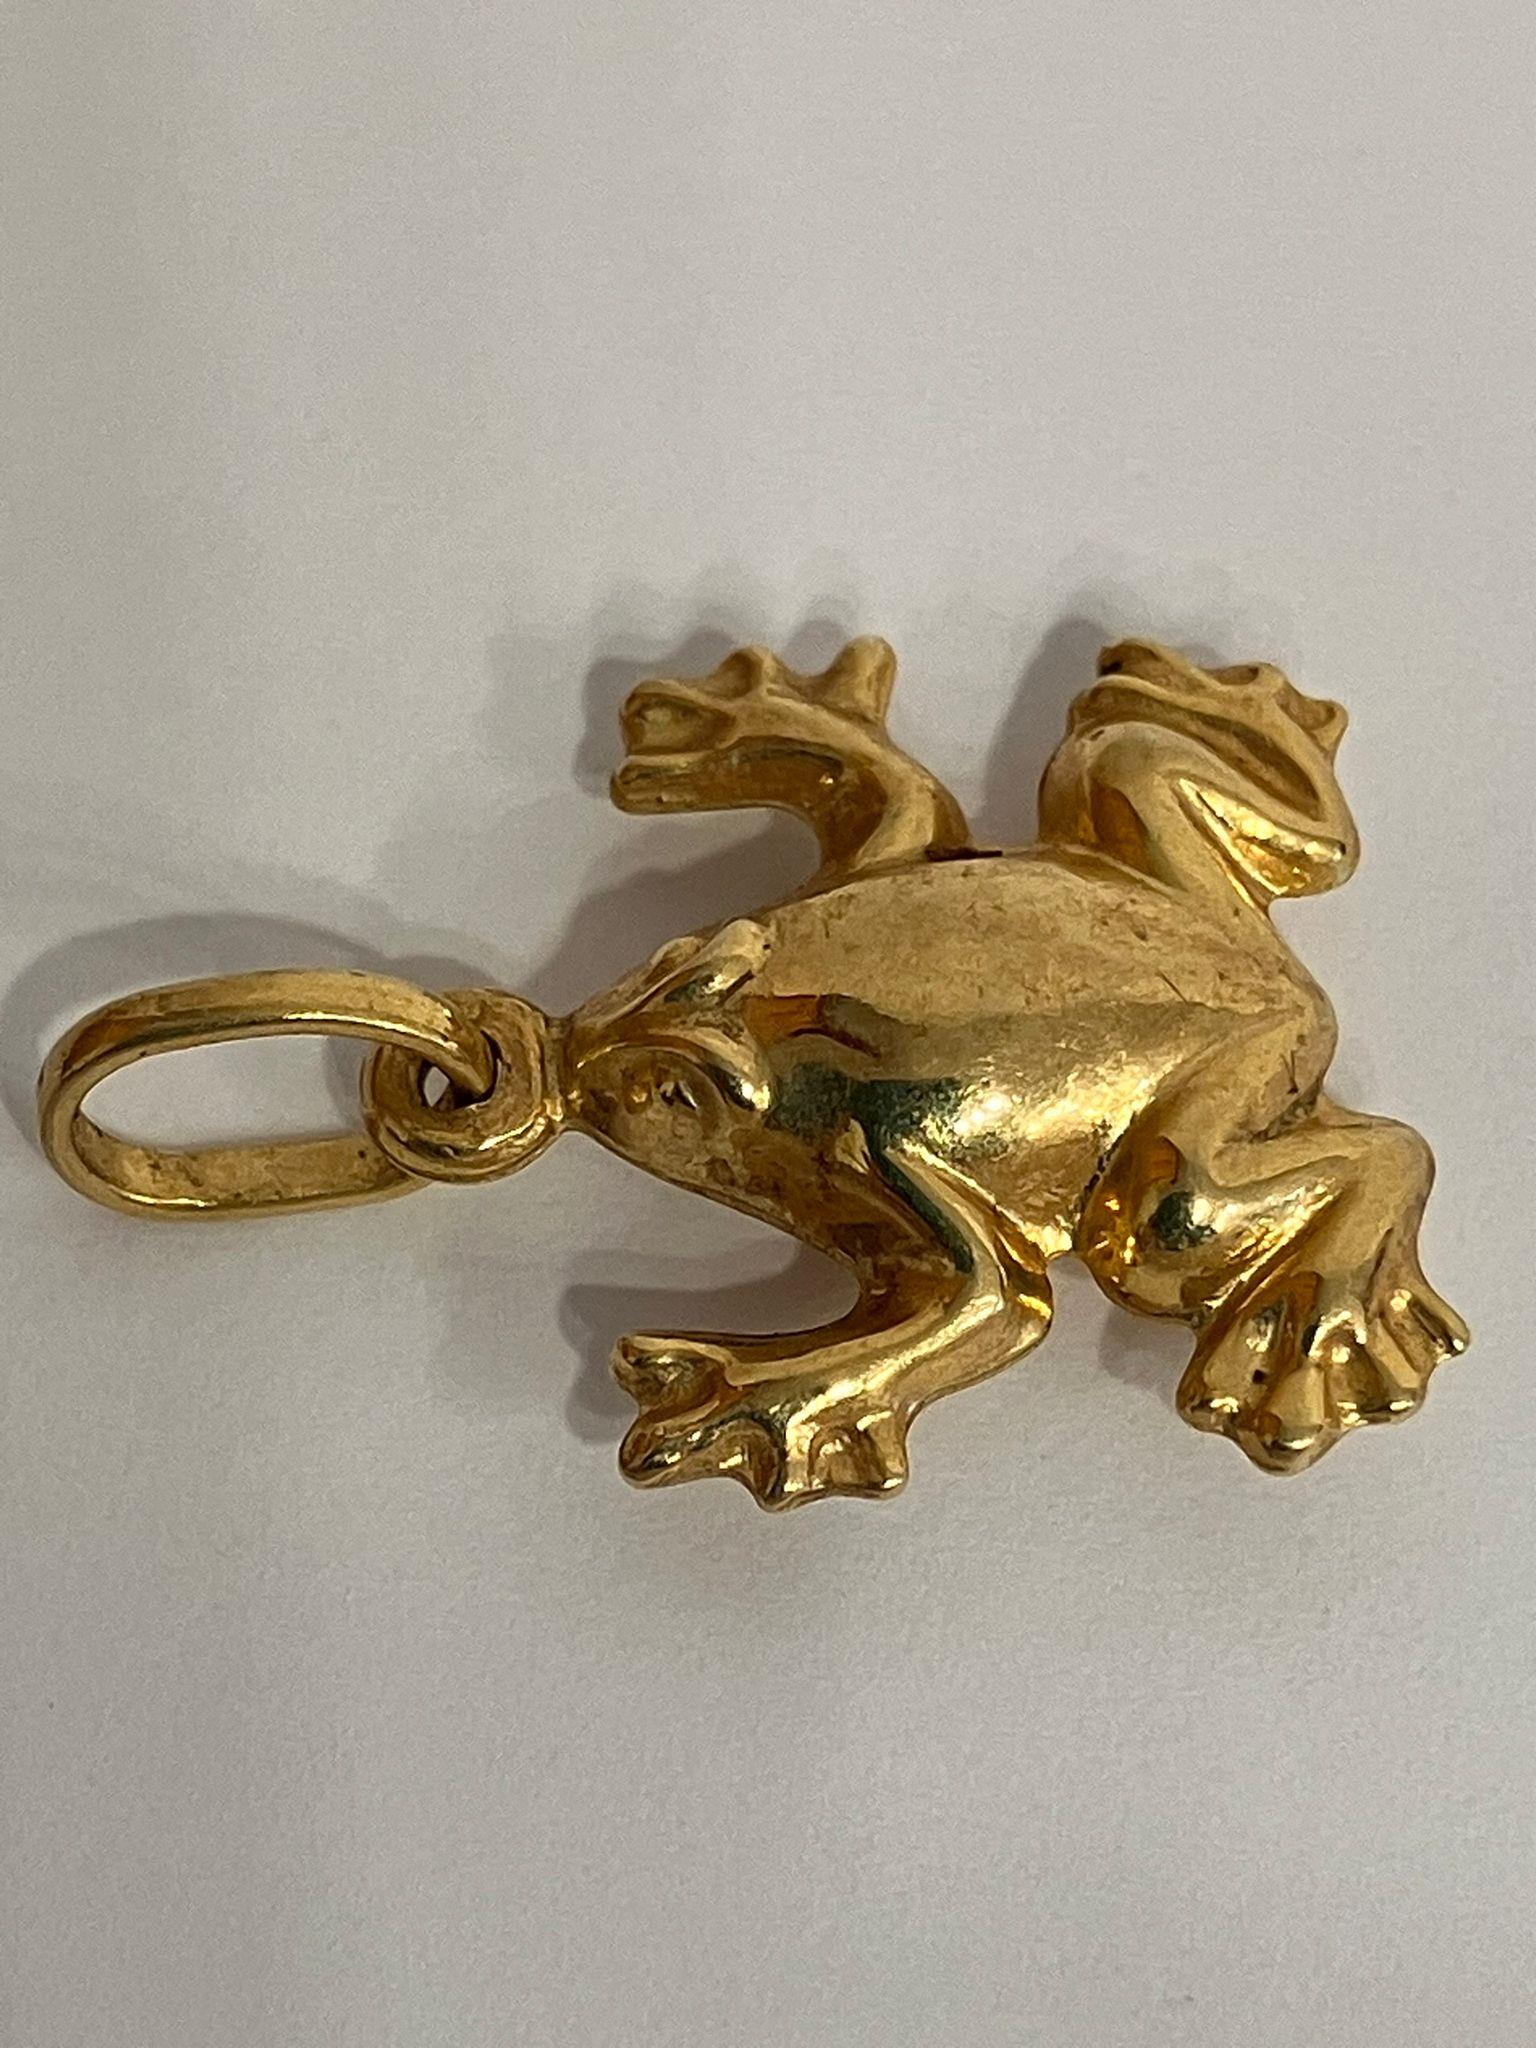 9 carat GOLD, FROG CHARM. 1.04 grams. - Image 3 of 3